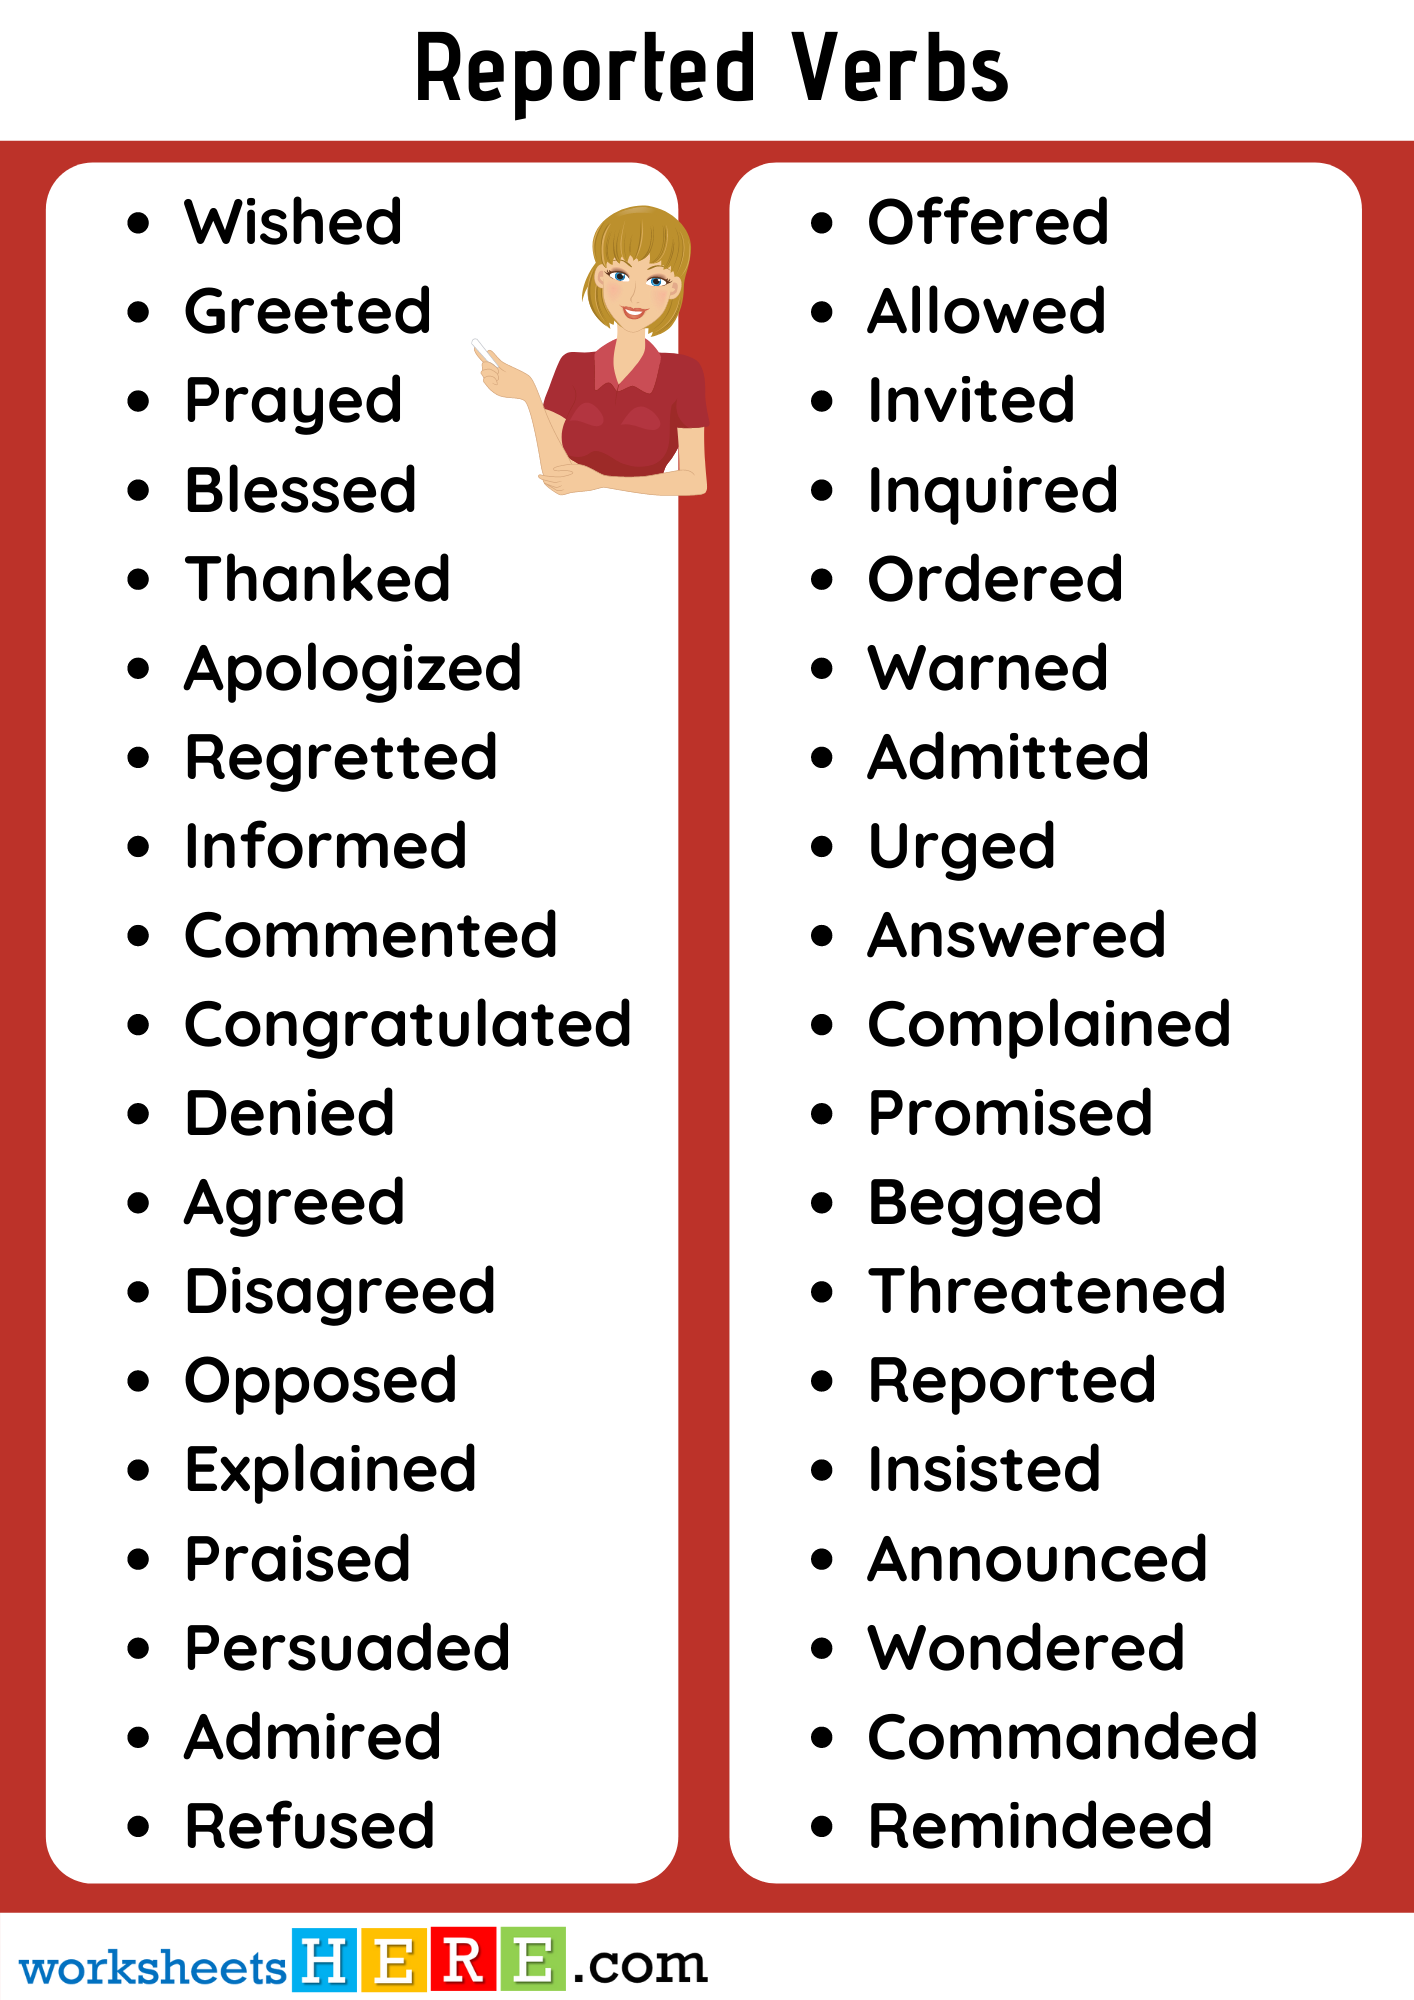 38 Reported Verbs List PDF Worksheet For Kids and Students